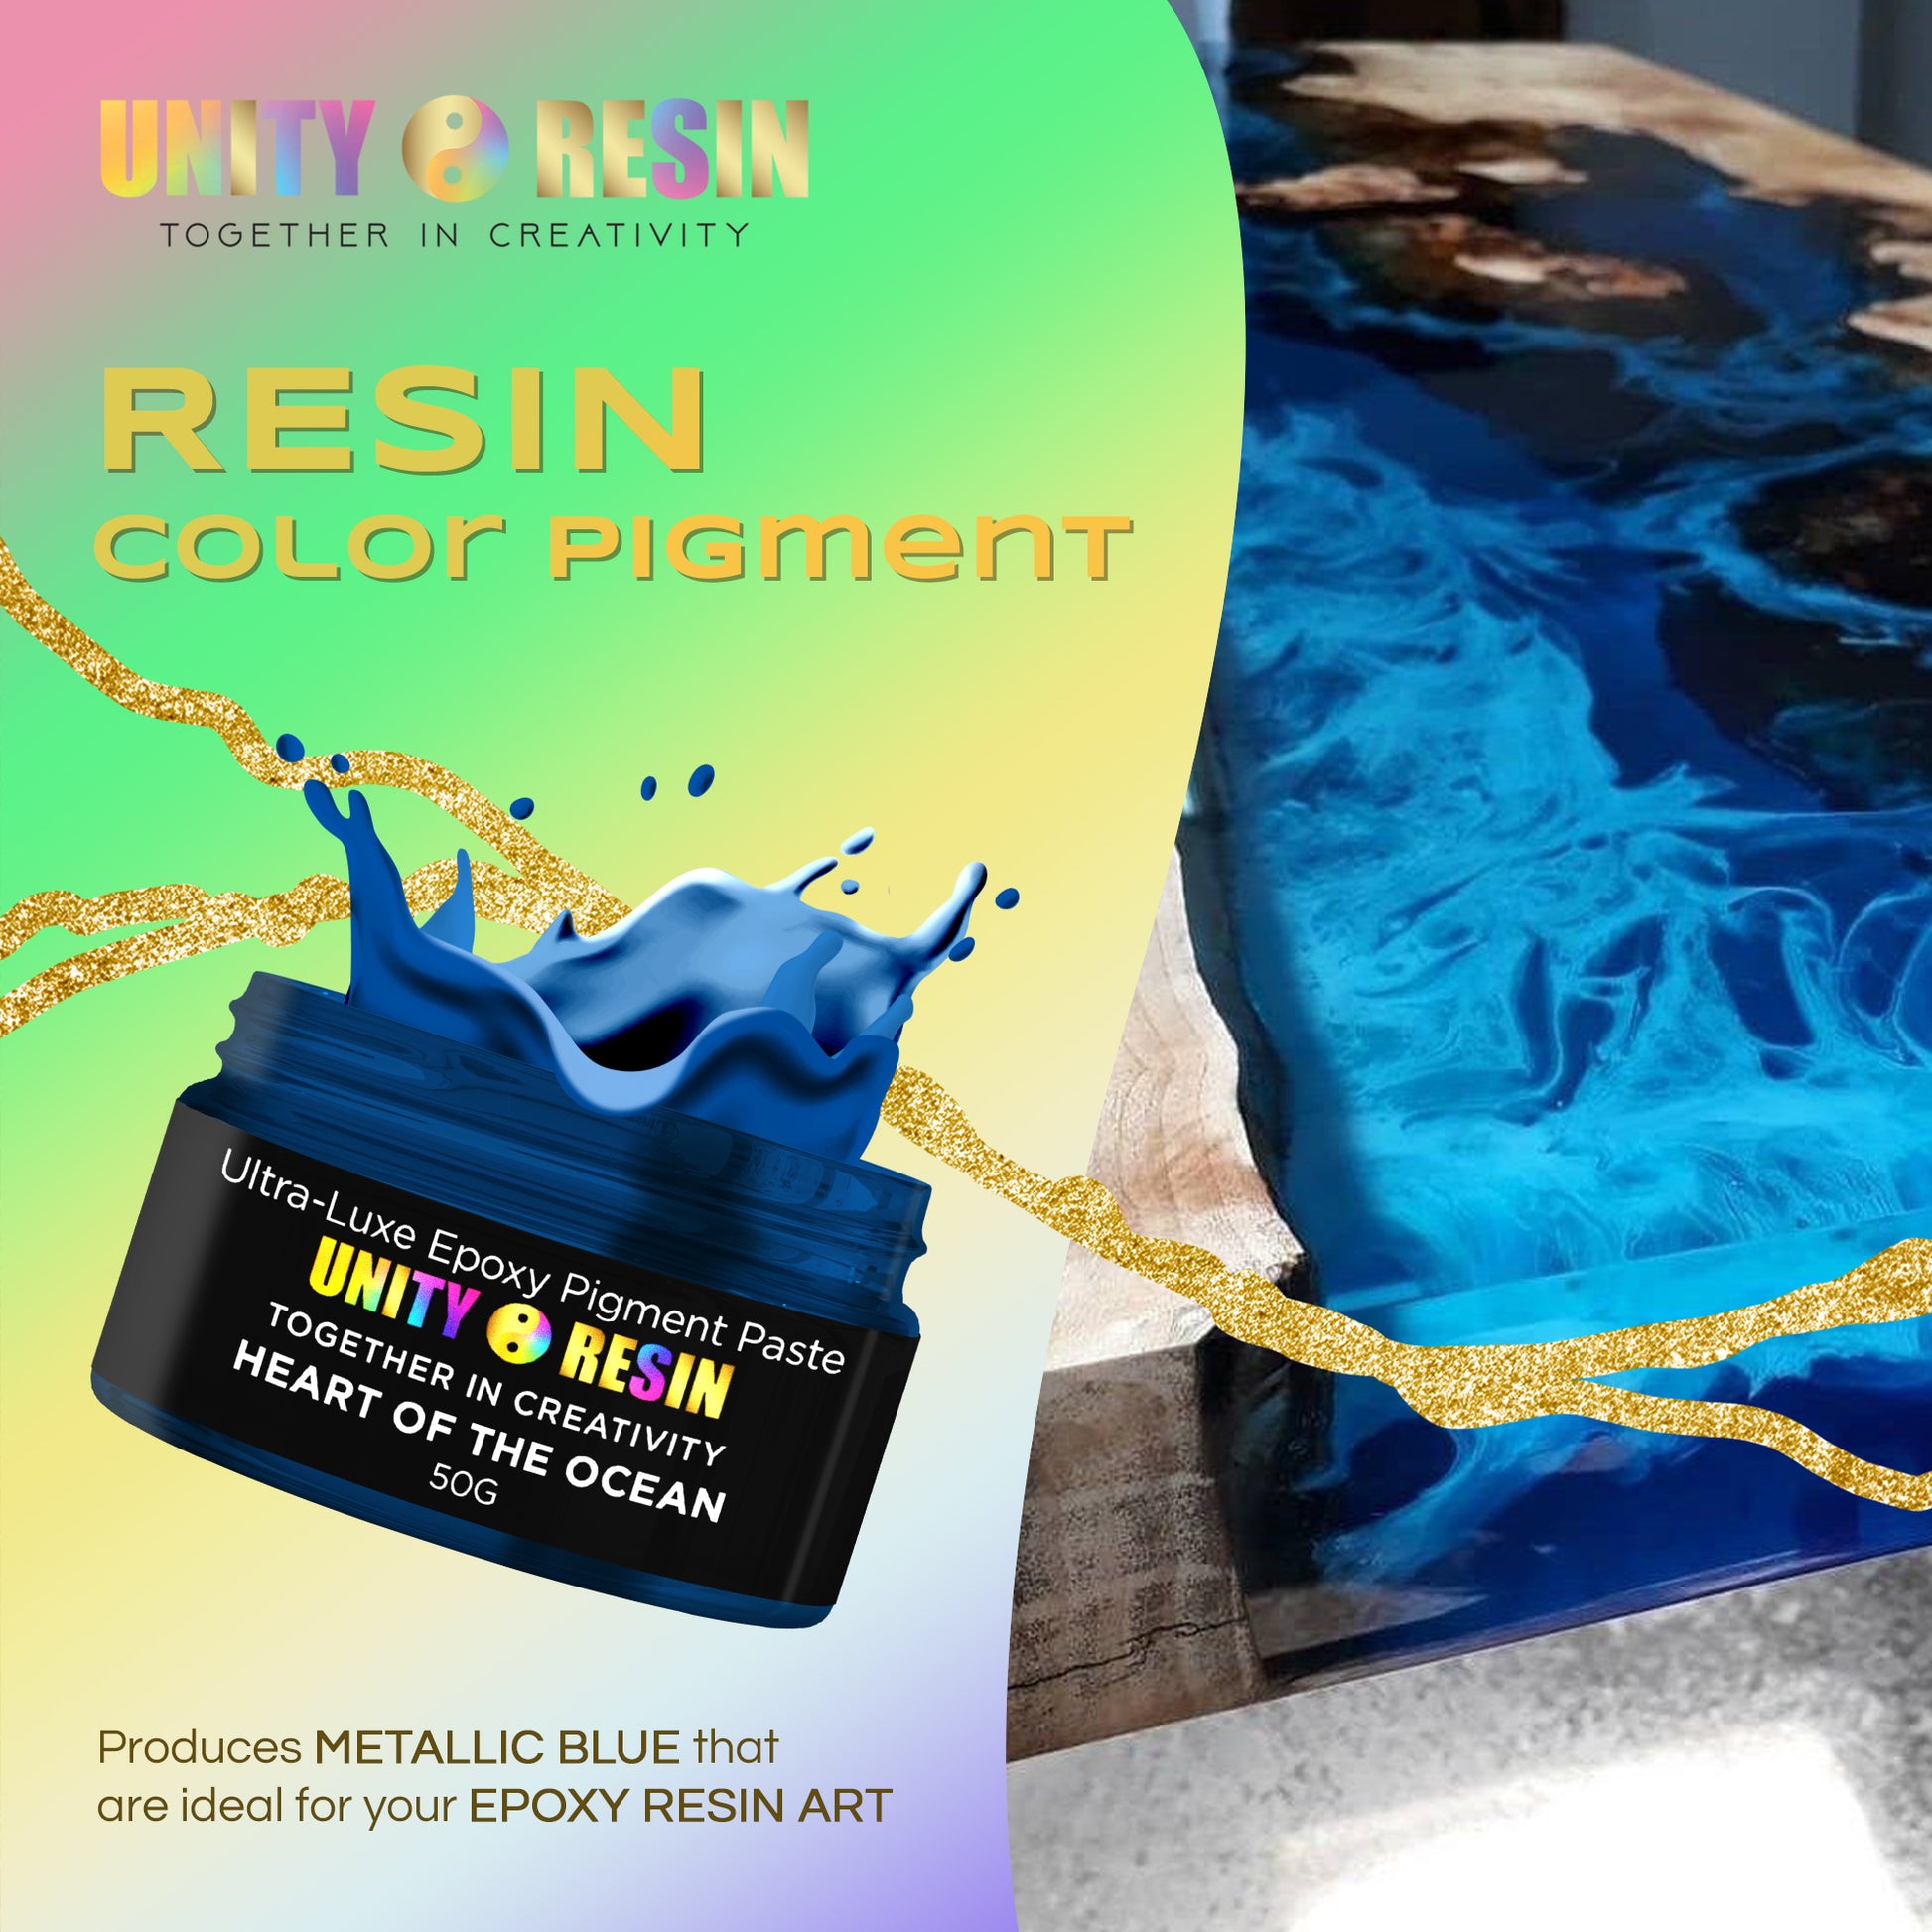  LETS RESIN Ocean White Epoxy Resin Pigment 167g/589oz, High  Concentrated Pigment Paste For Epoxy Resin & UV Resin, UV Resistant Opaque  Pigment For Creates Cells & Lacing, 3D Flower Resin